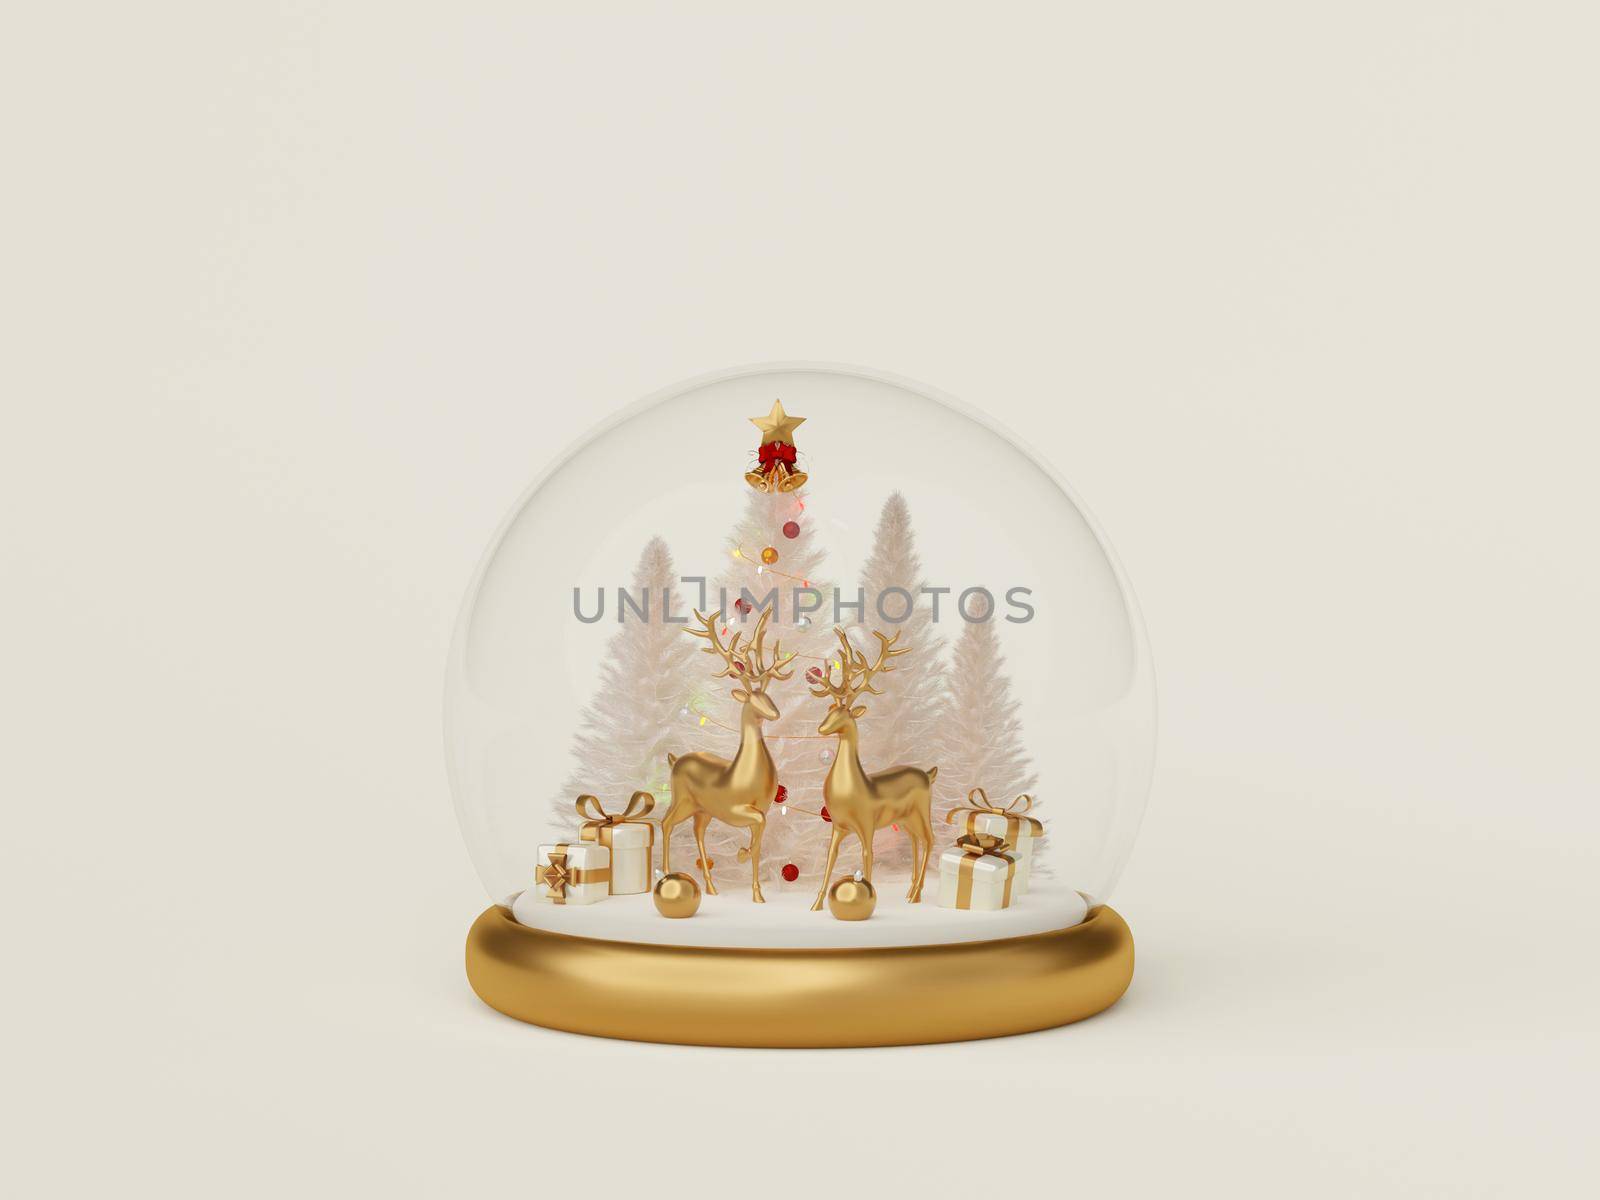 3d illustration of Reindeer with Christmas tree and gift box in snow globe by nutzchotwarut